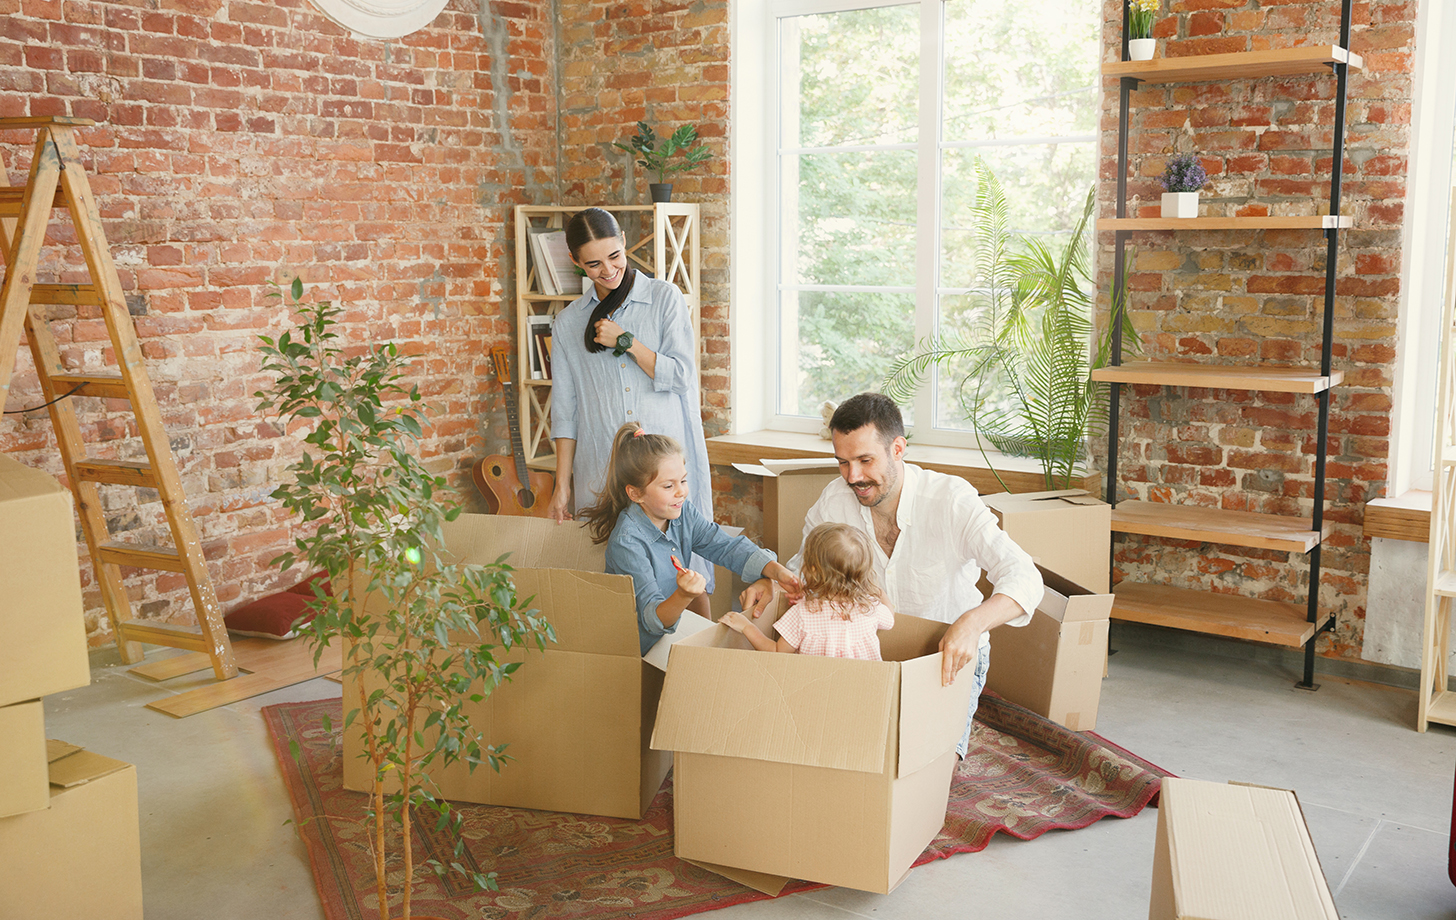 New life. Adult family moved to a new house or apartment. Spouses and children look happy and confident. Moving, relations, new life concept. Unpacking boxes with their things, playing together.